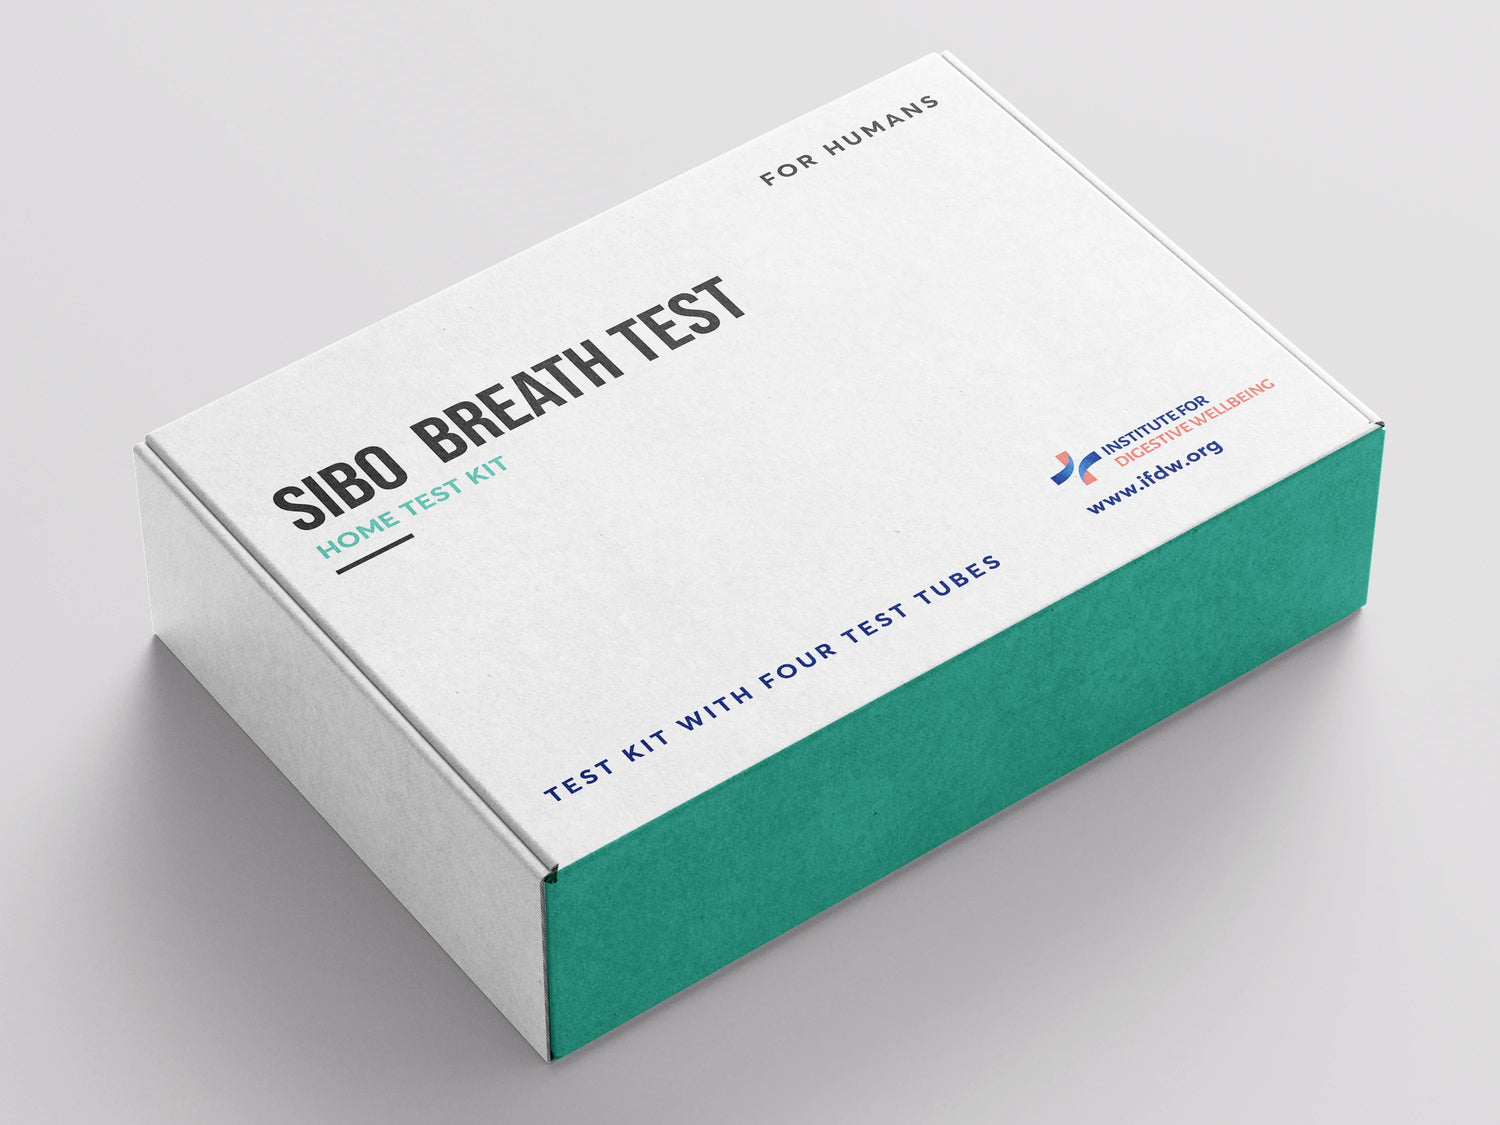 SIBO Breath Test - SIBO At-home Test